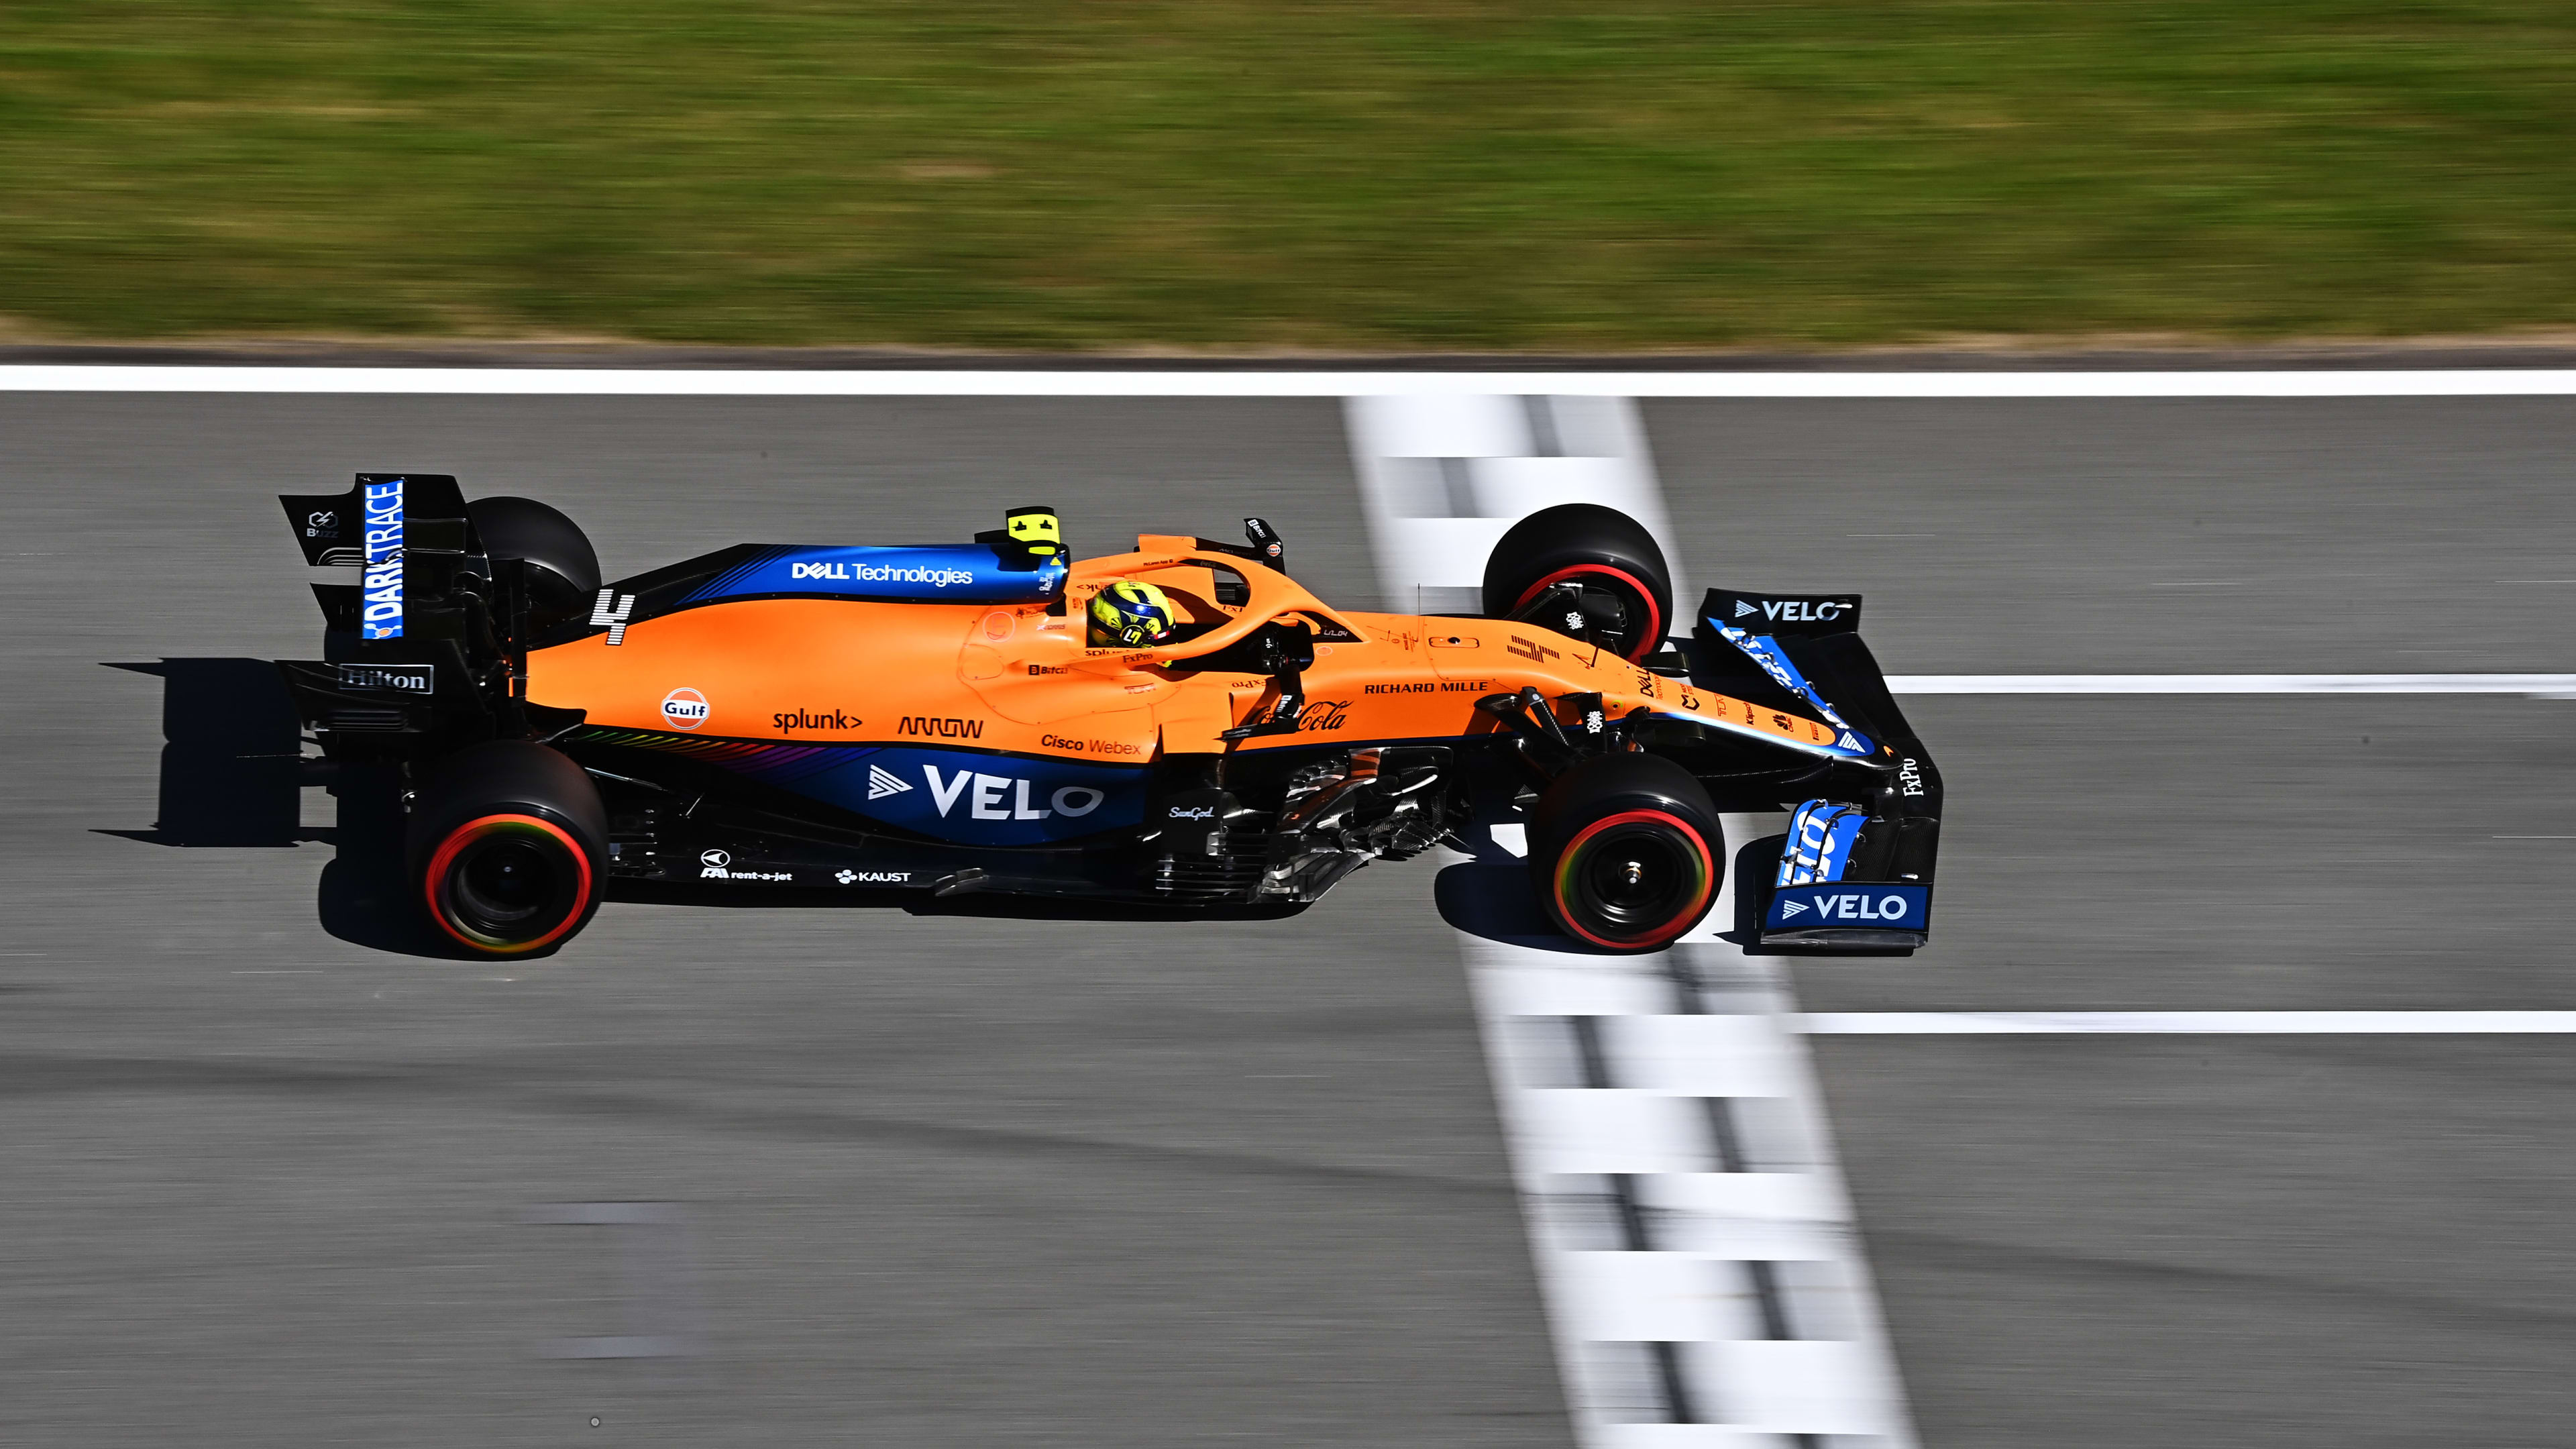 Being blocked by Mazepin in Q1 definitely cost me says Norris, as he qualifies P9 in Spain Formula 1®